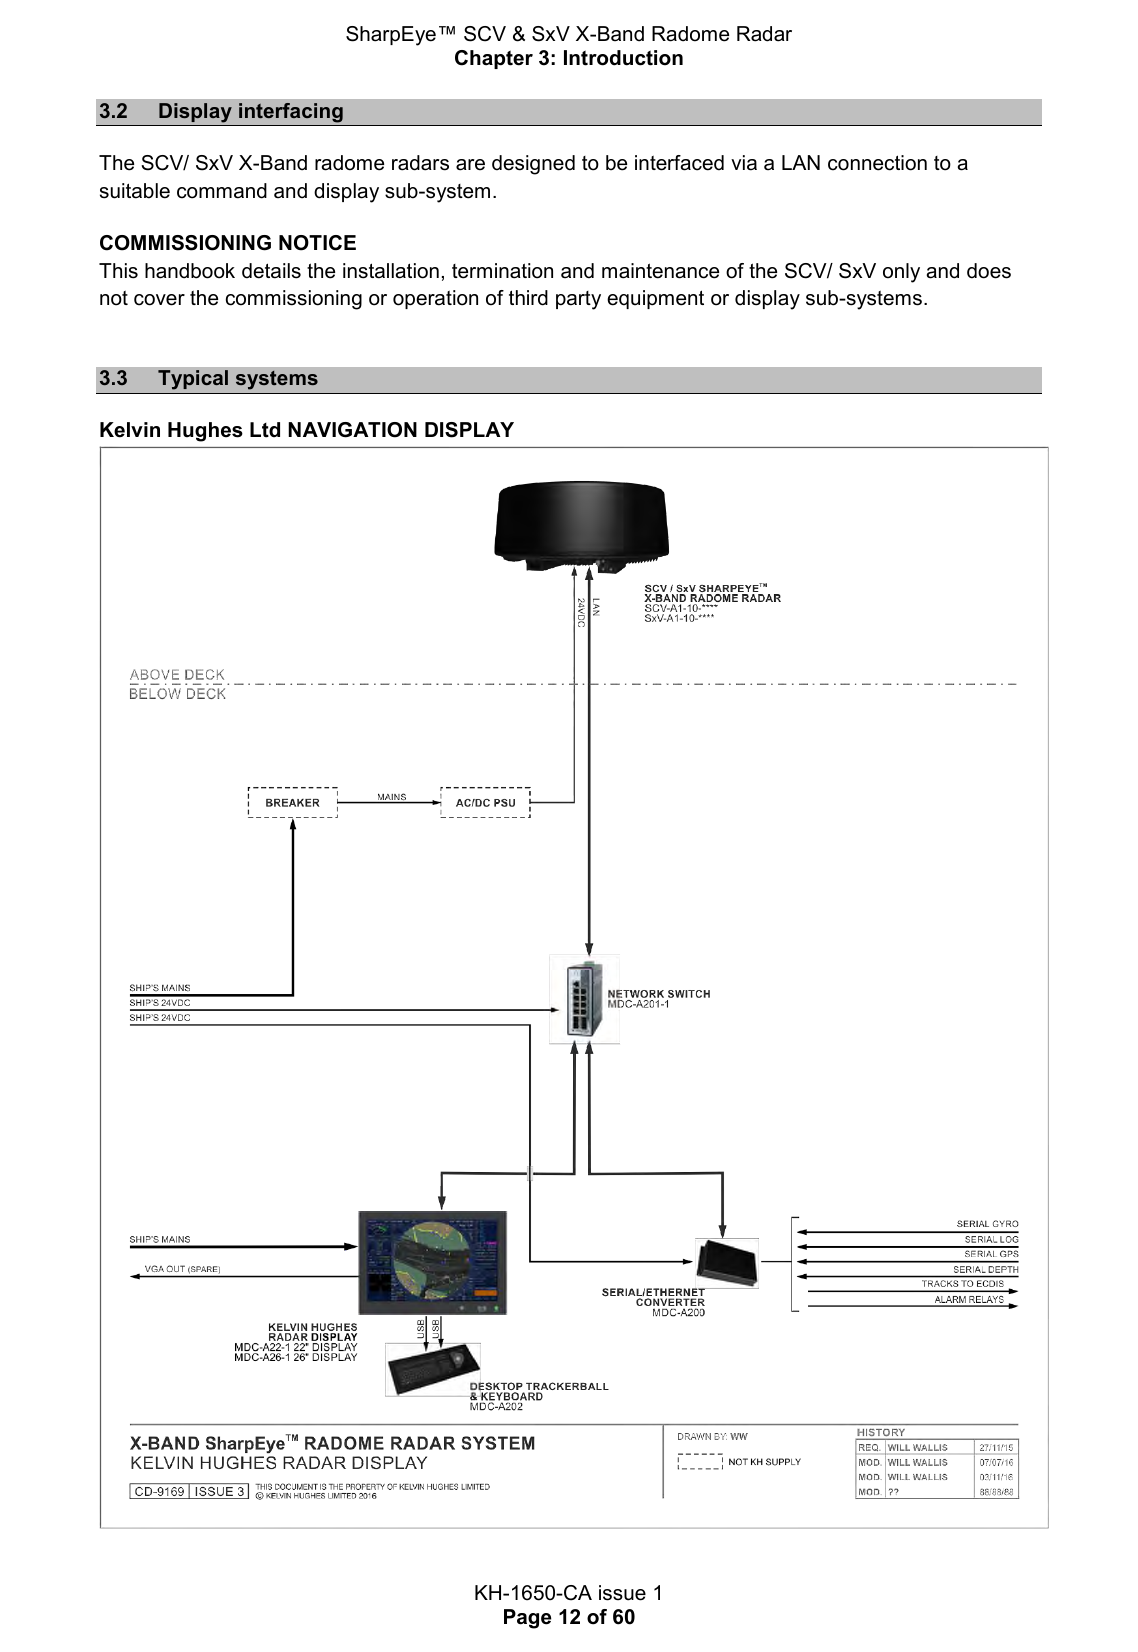 SharpEye™ SCV &amp; SxV X-Band Radome Radar Chapter 3: Introduction  KH-1650-CA issue 1 Page 12 of 60 3.2  Display interfacing The SCV/ SxV X-Band radome radars are designed to be interfaced via a LAN connection to a suitable command and display sub-system. COMMISSIONING NOTICE This handbook details the installation, termination and maintenance of the SCV/ SxV only and does not cover the commissioning or operation of third party equipment or display sub-systems.  3.3  Typical systems Kelvin Hughes Ltd NAVIGATION DISPLAY  